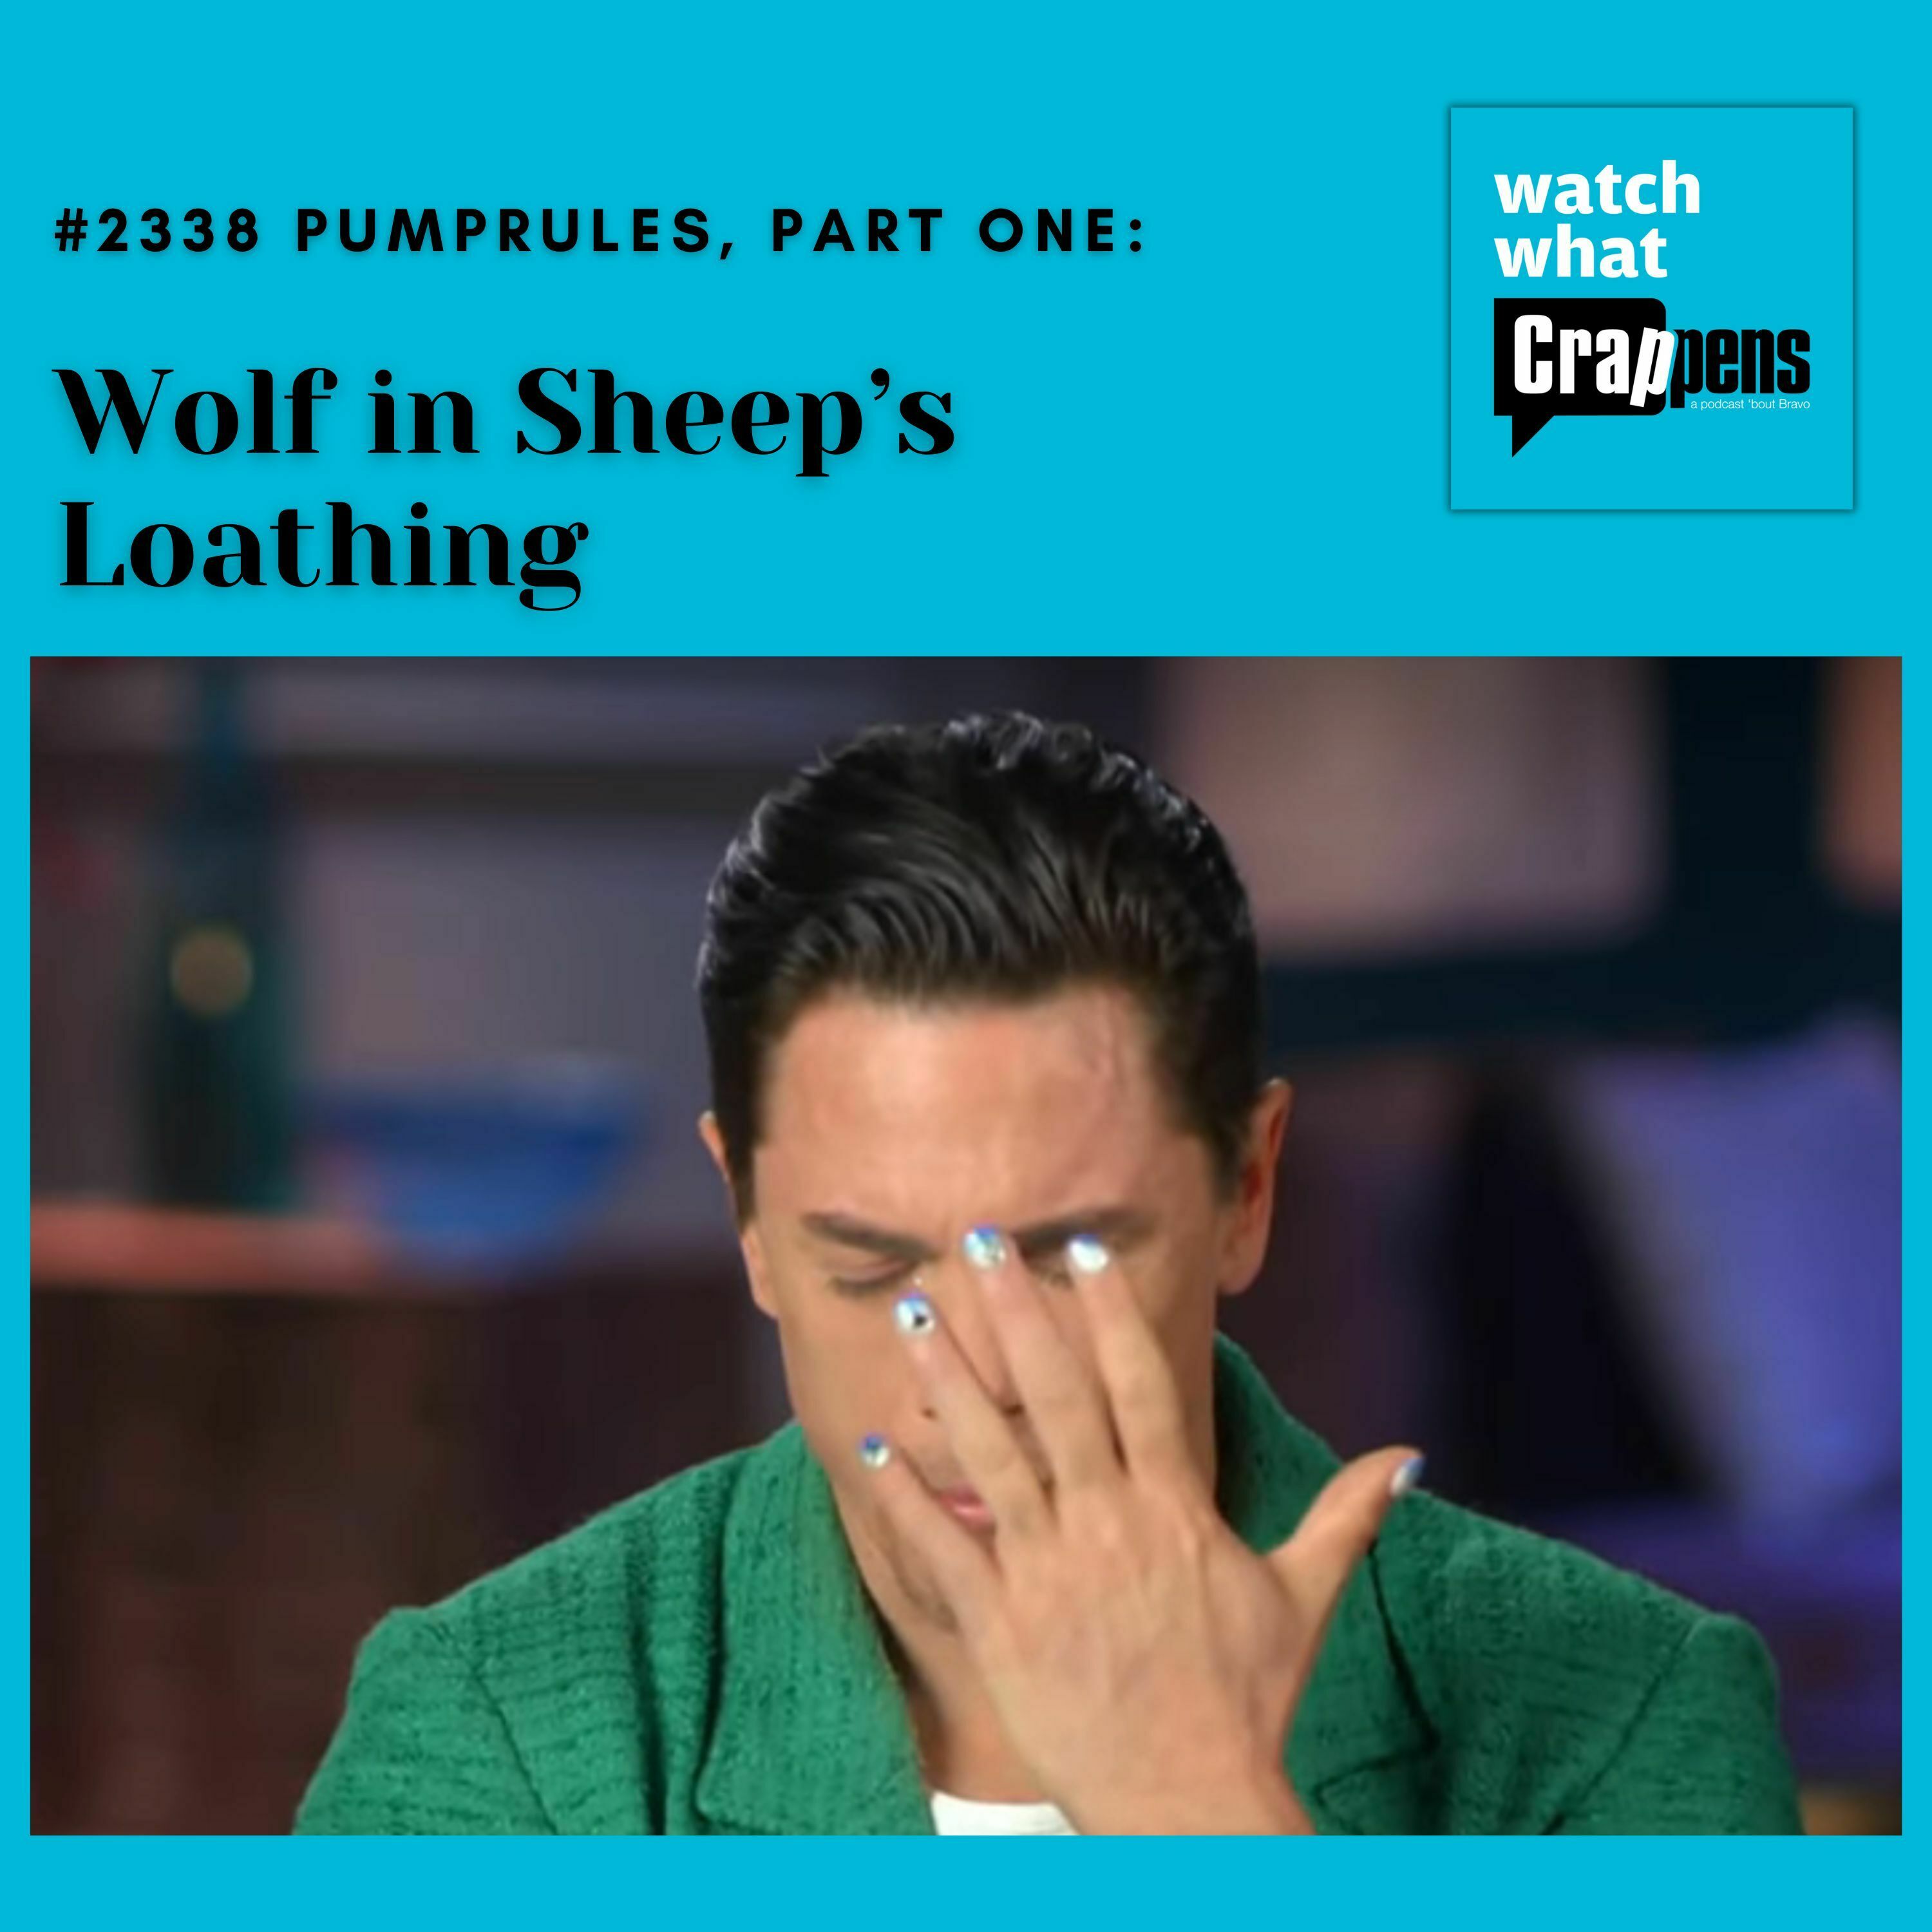 #2338 PumpRules Part 1: Wolf in Sheep’s Loathing